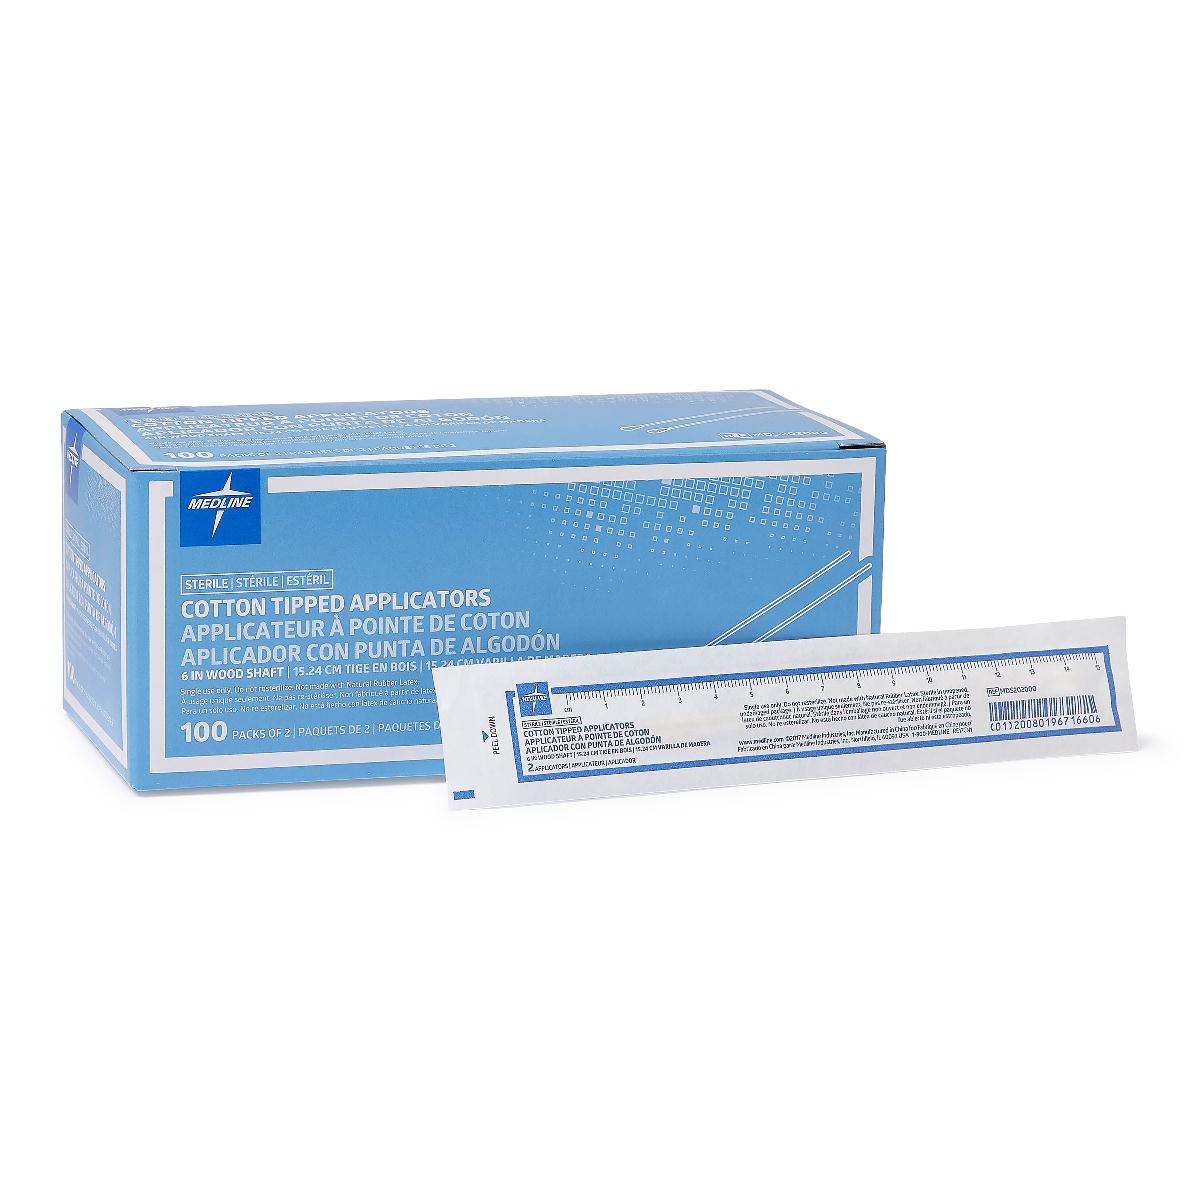 2000 Each-Case / 6.00 IN / 6.00000 IN Exam & Diagnostic Supplies - MEDLINE - Wasatch Medical Supply